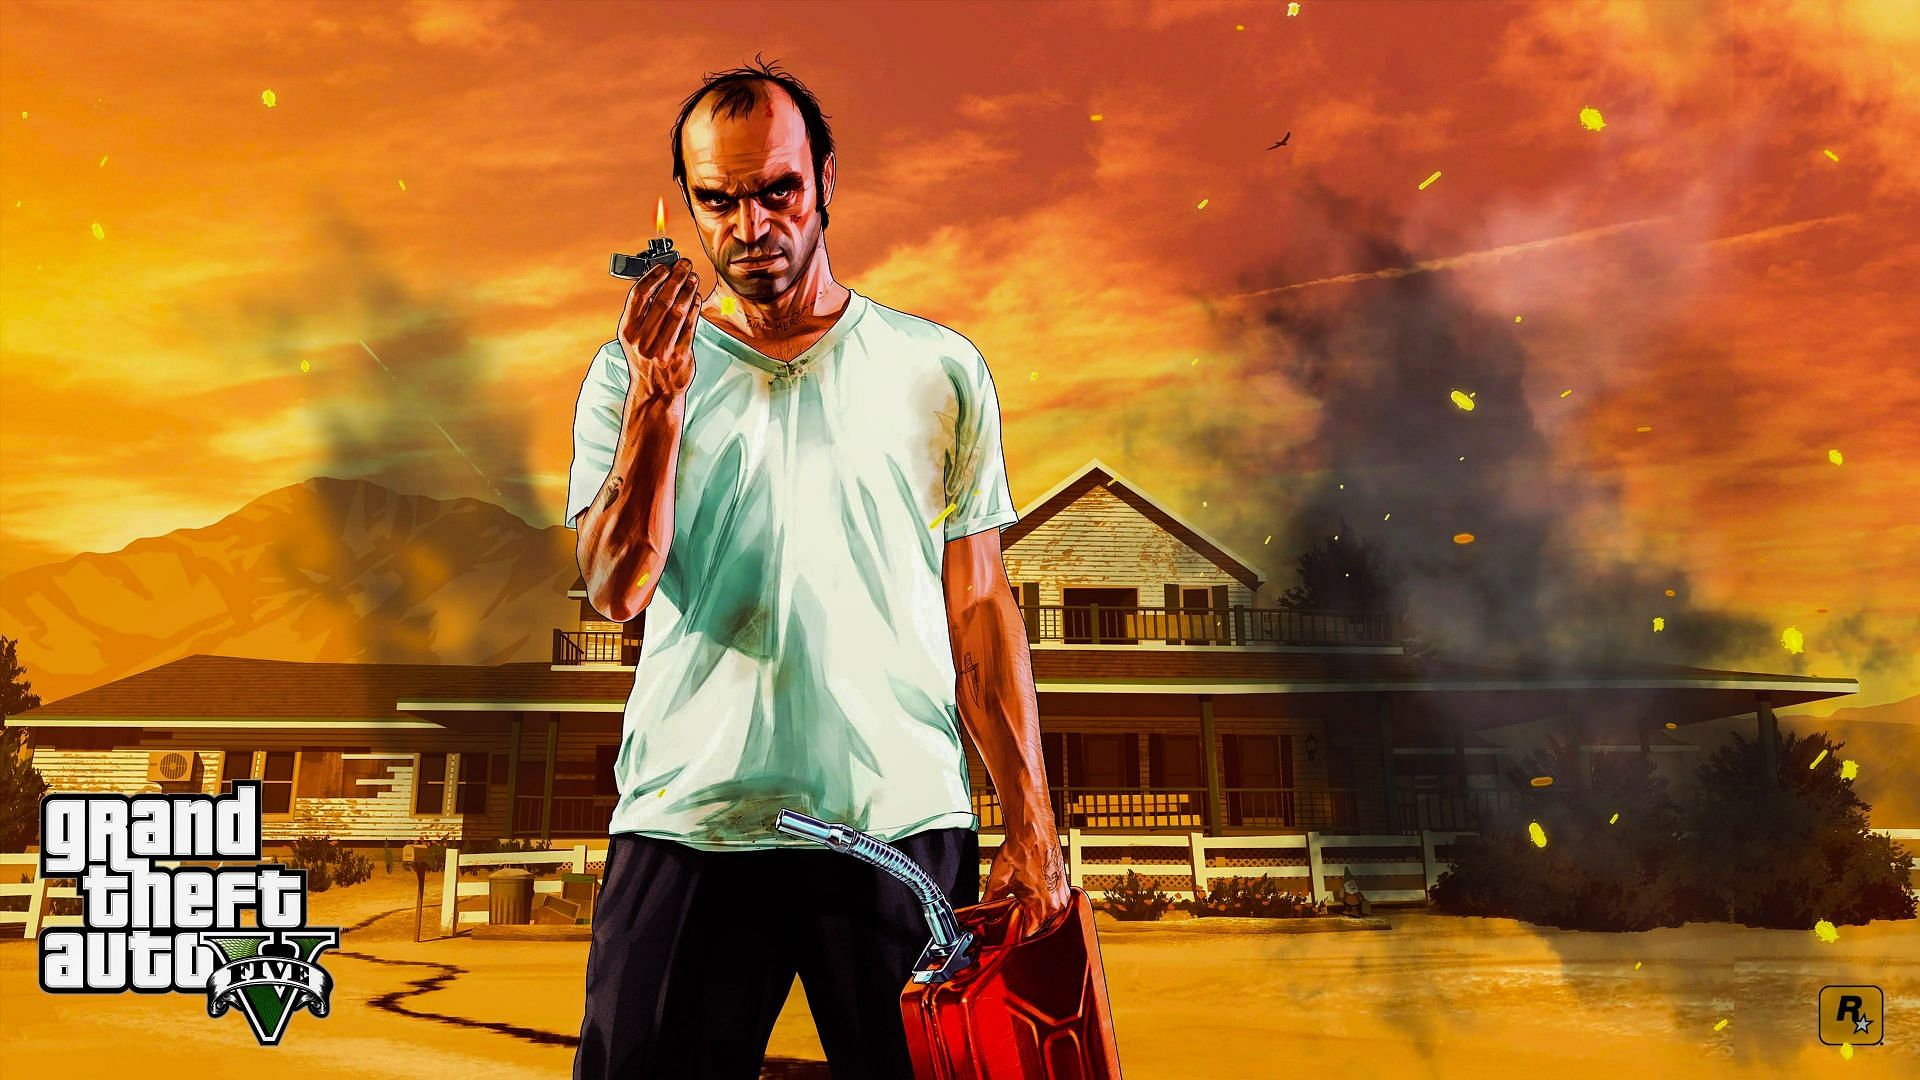 Trevor Philips is a character in the Grand Theft Auto series, appearing as one of the three protagonists of Grand Theft Auto V (Image via Rockstar Games))